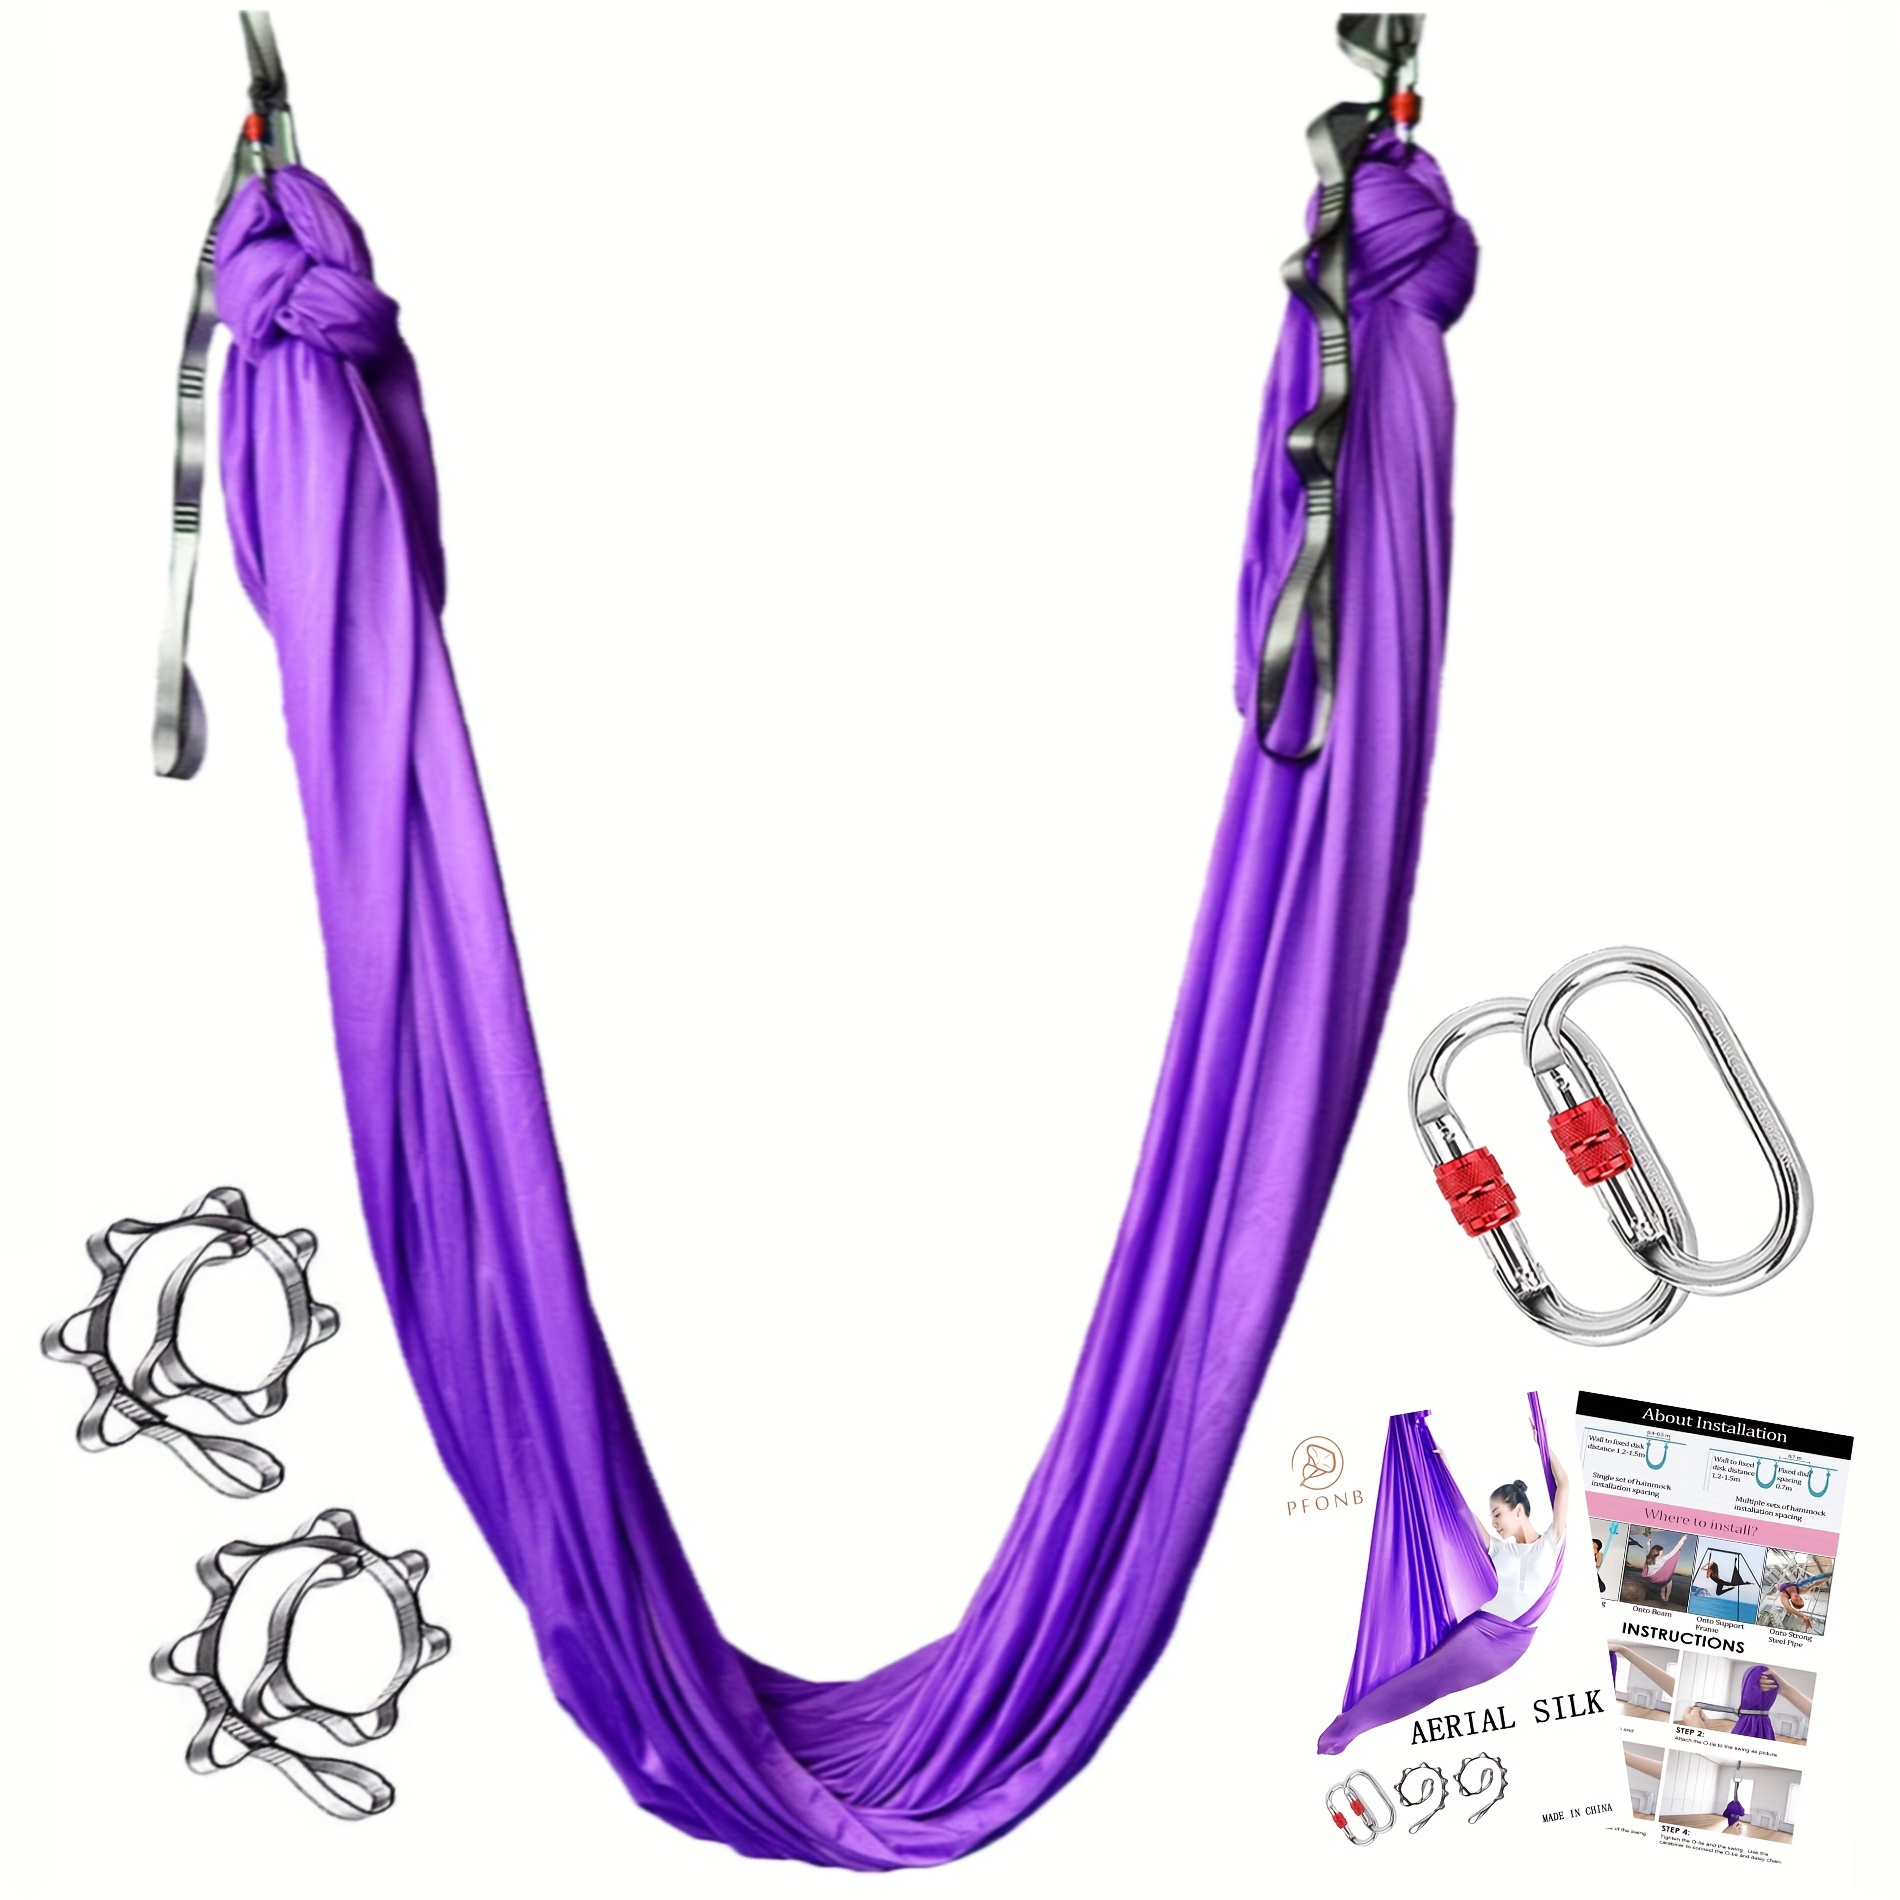 

1pc Aerial Yoga Strap, Pilates Hammock Swing For Inversion Exercises, Flexibility And Core Strength Training - Chains, Carabiners And Pose Guide Included